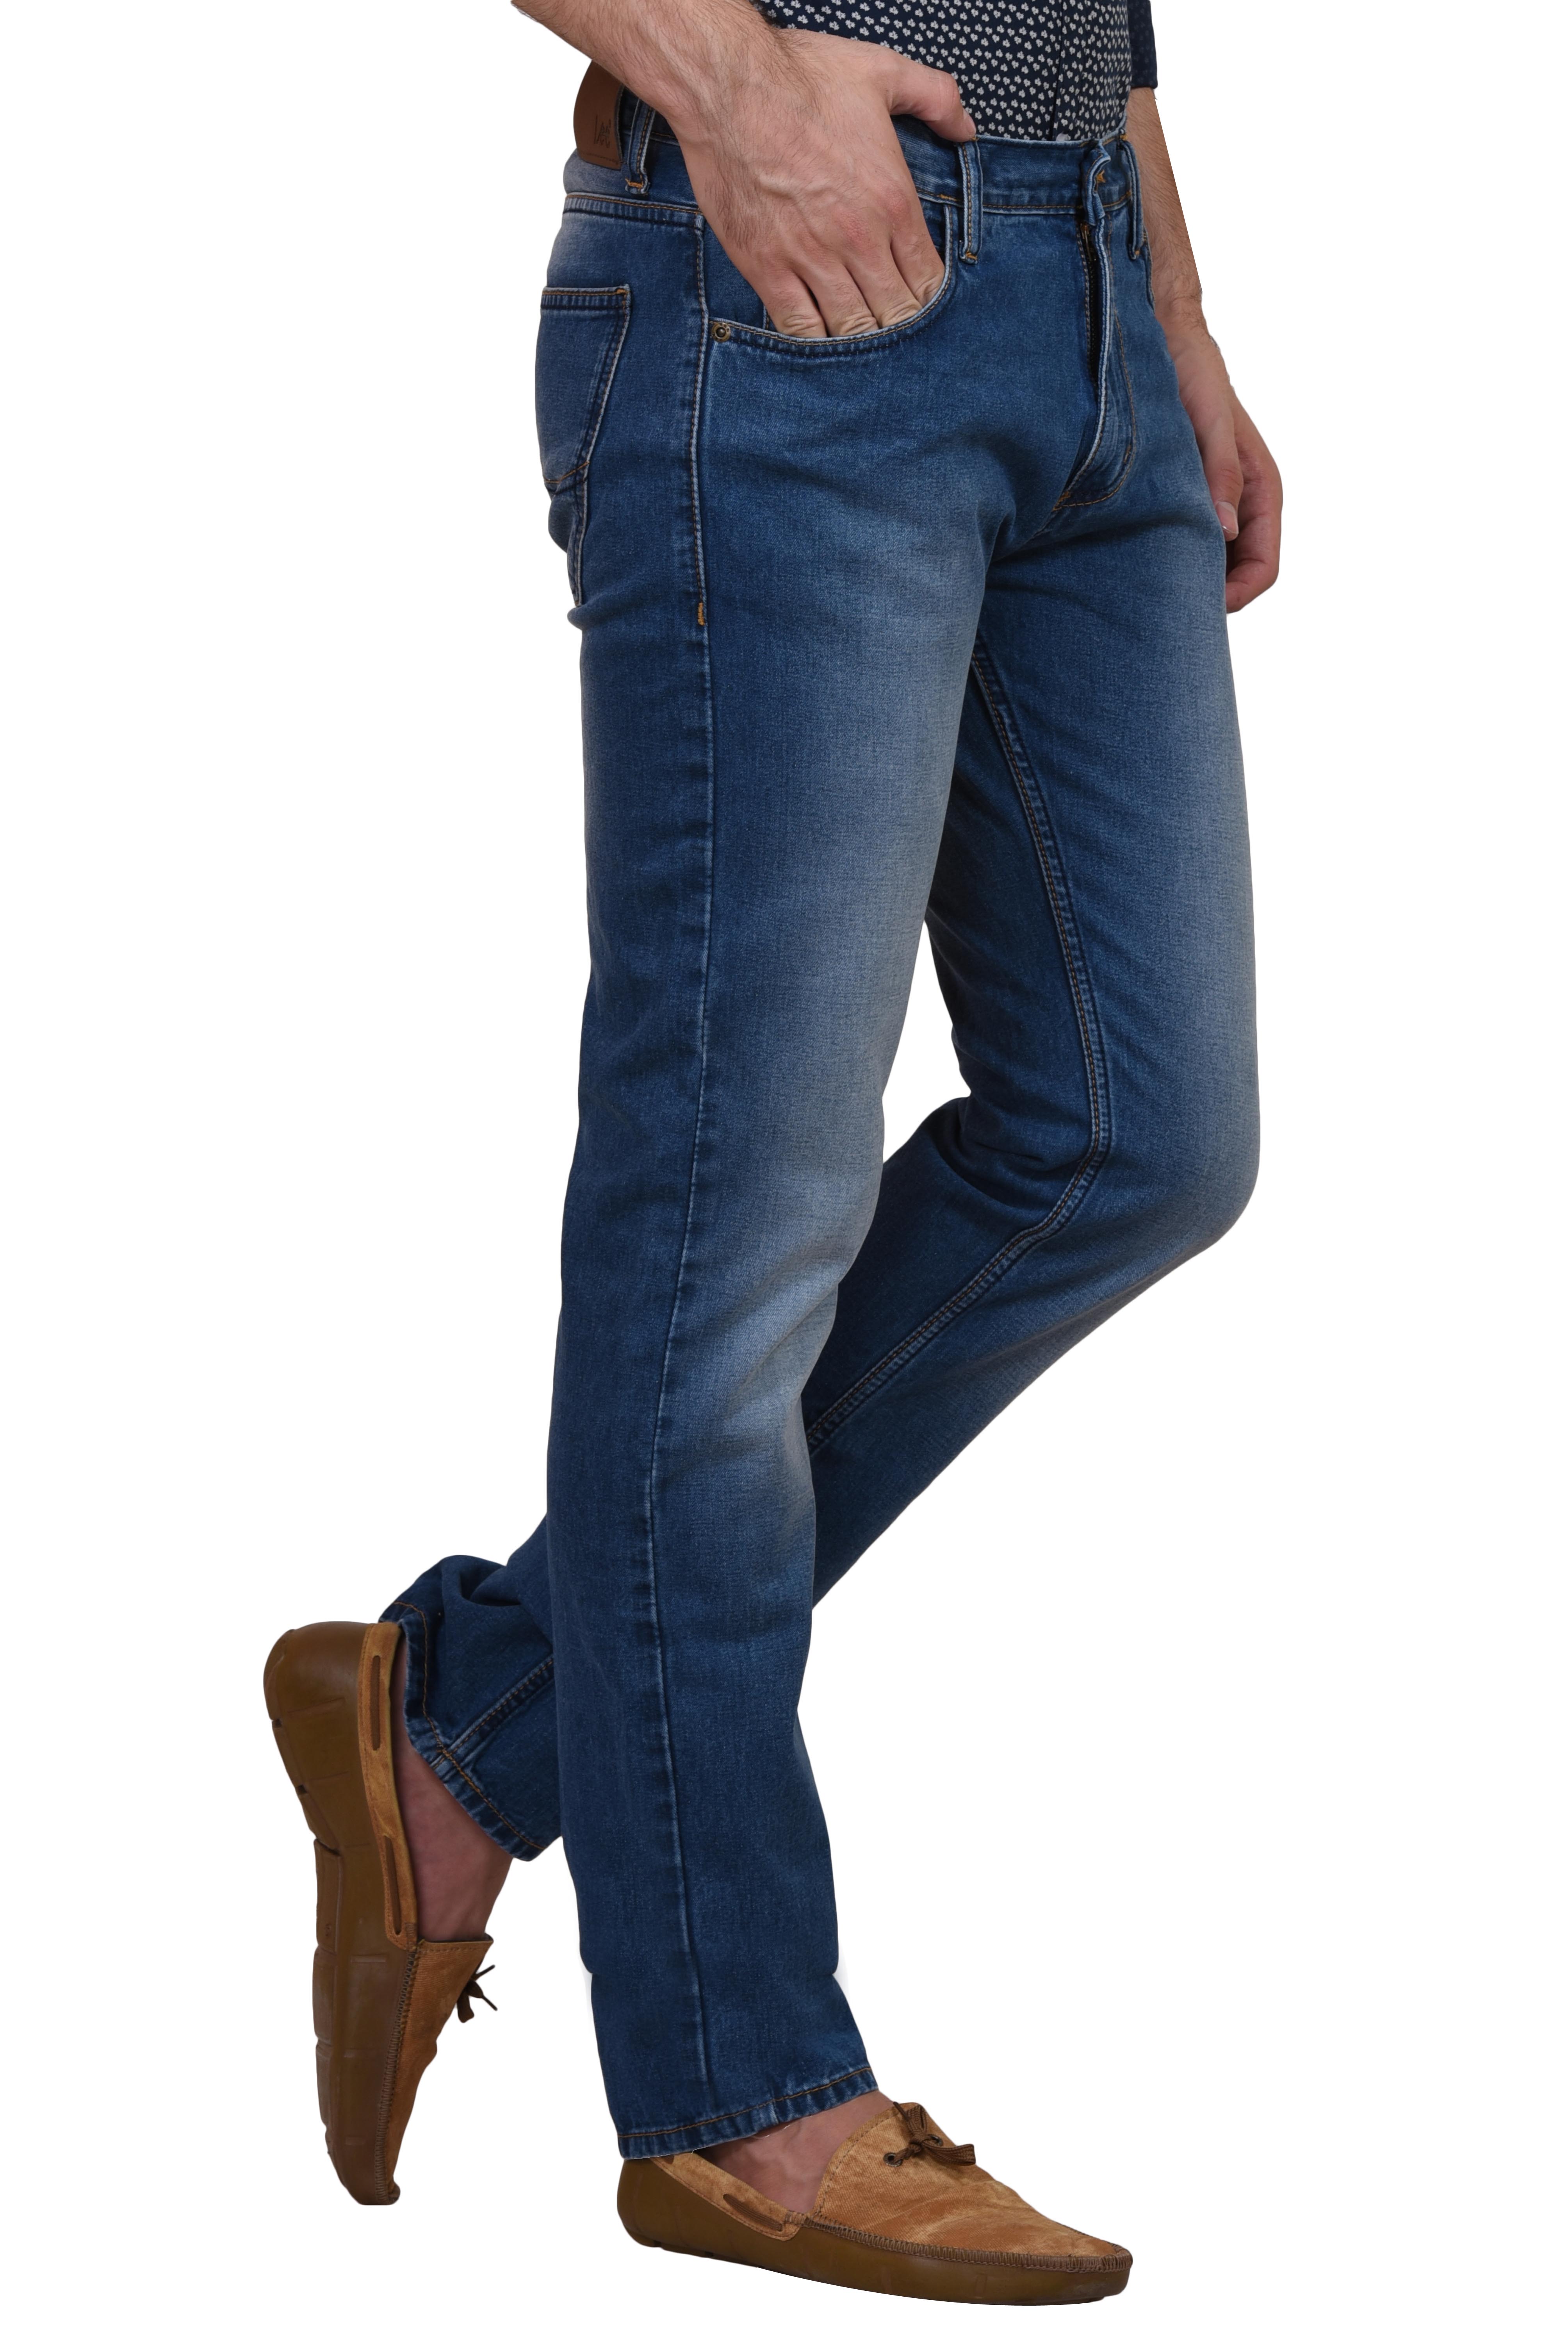 Buy Lee Navy Blue Slim Fit Mid Rise Mens Jeans Online @ ₹1379 from ...